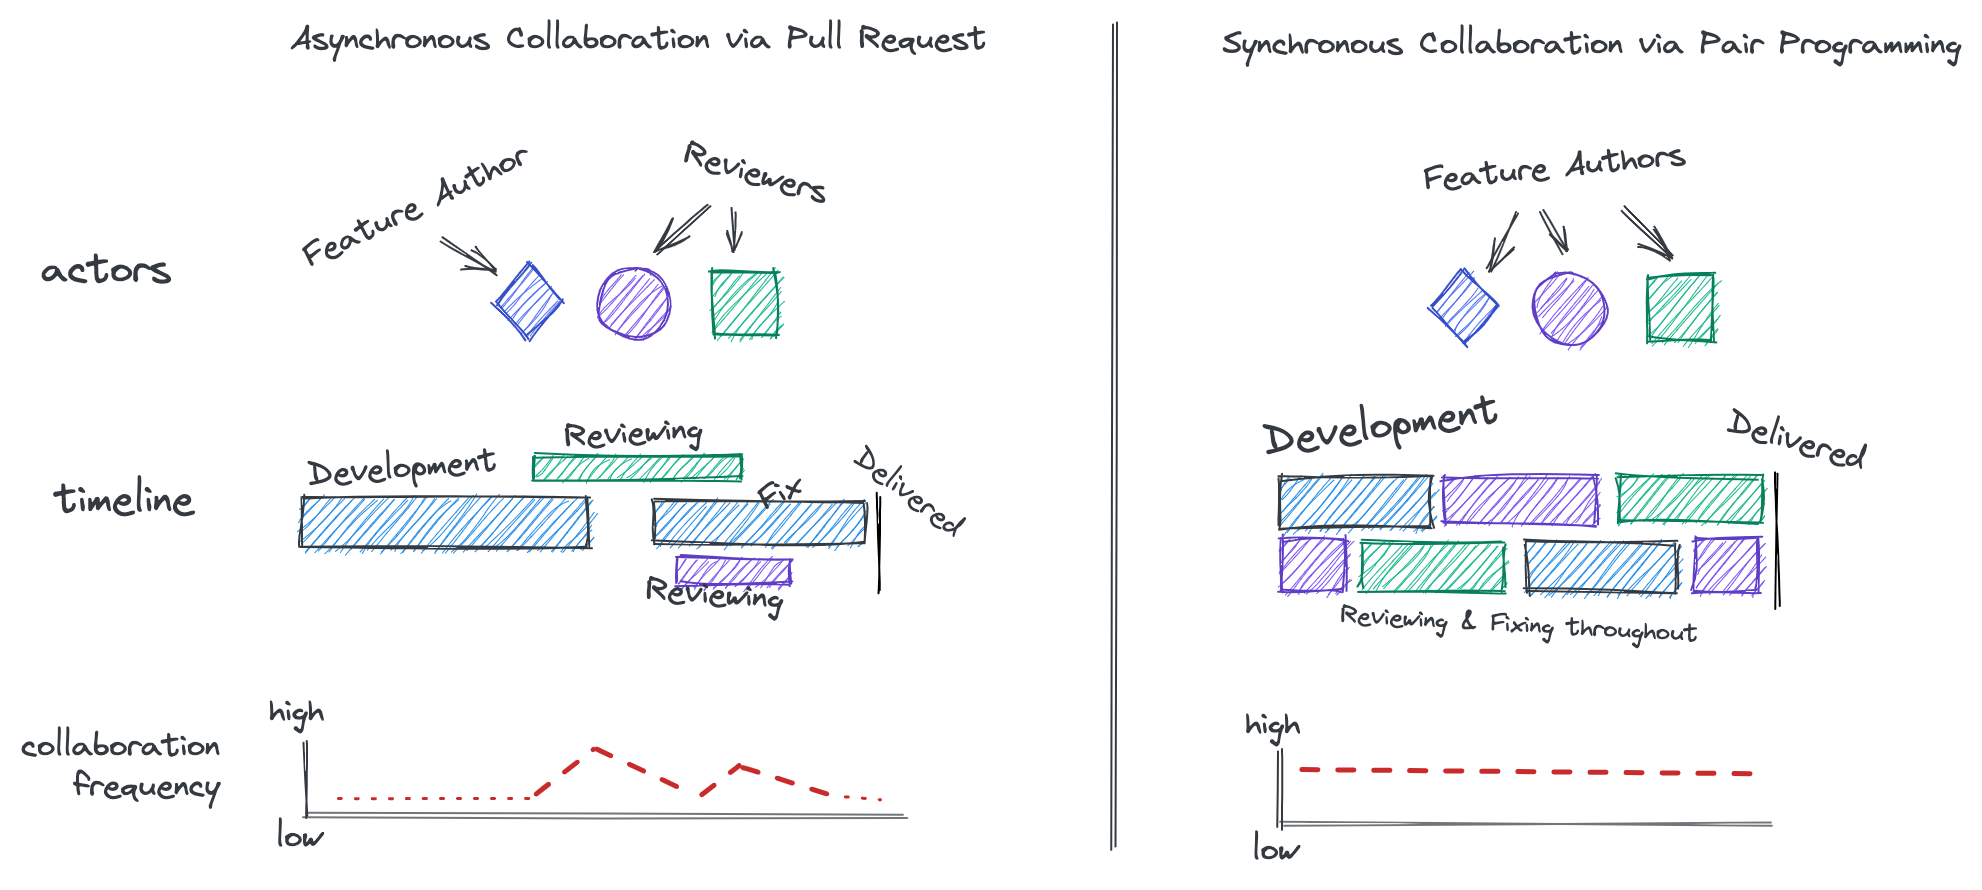 The timelines of synchronous paired development and asynchronous pull requests